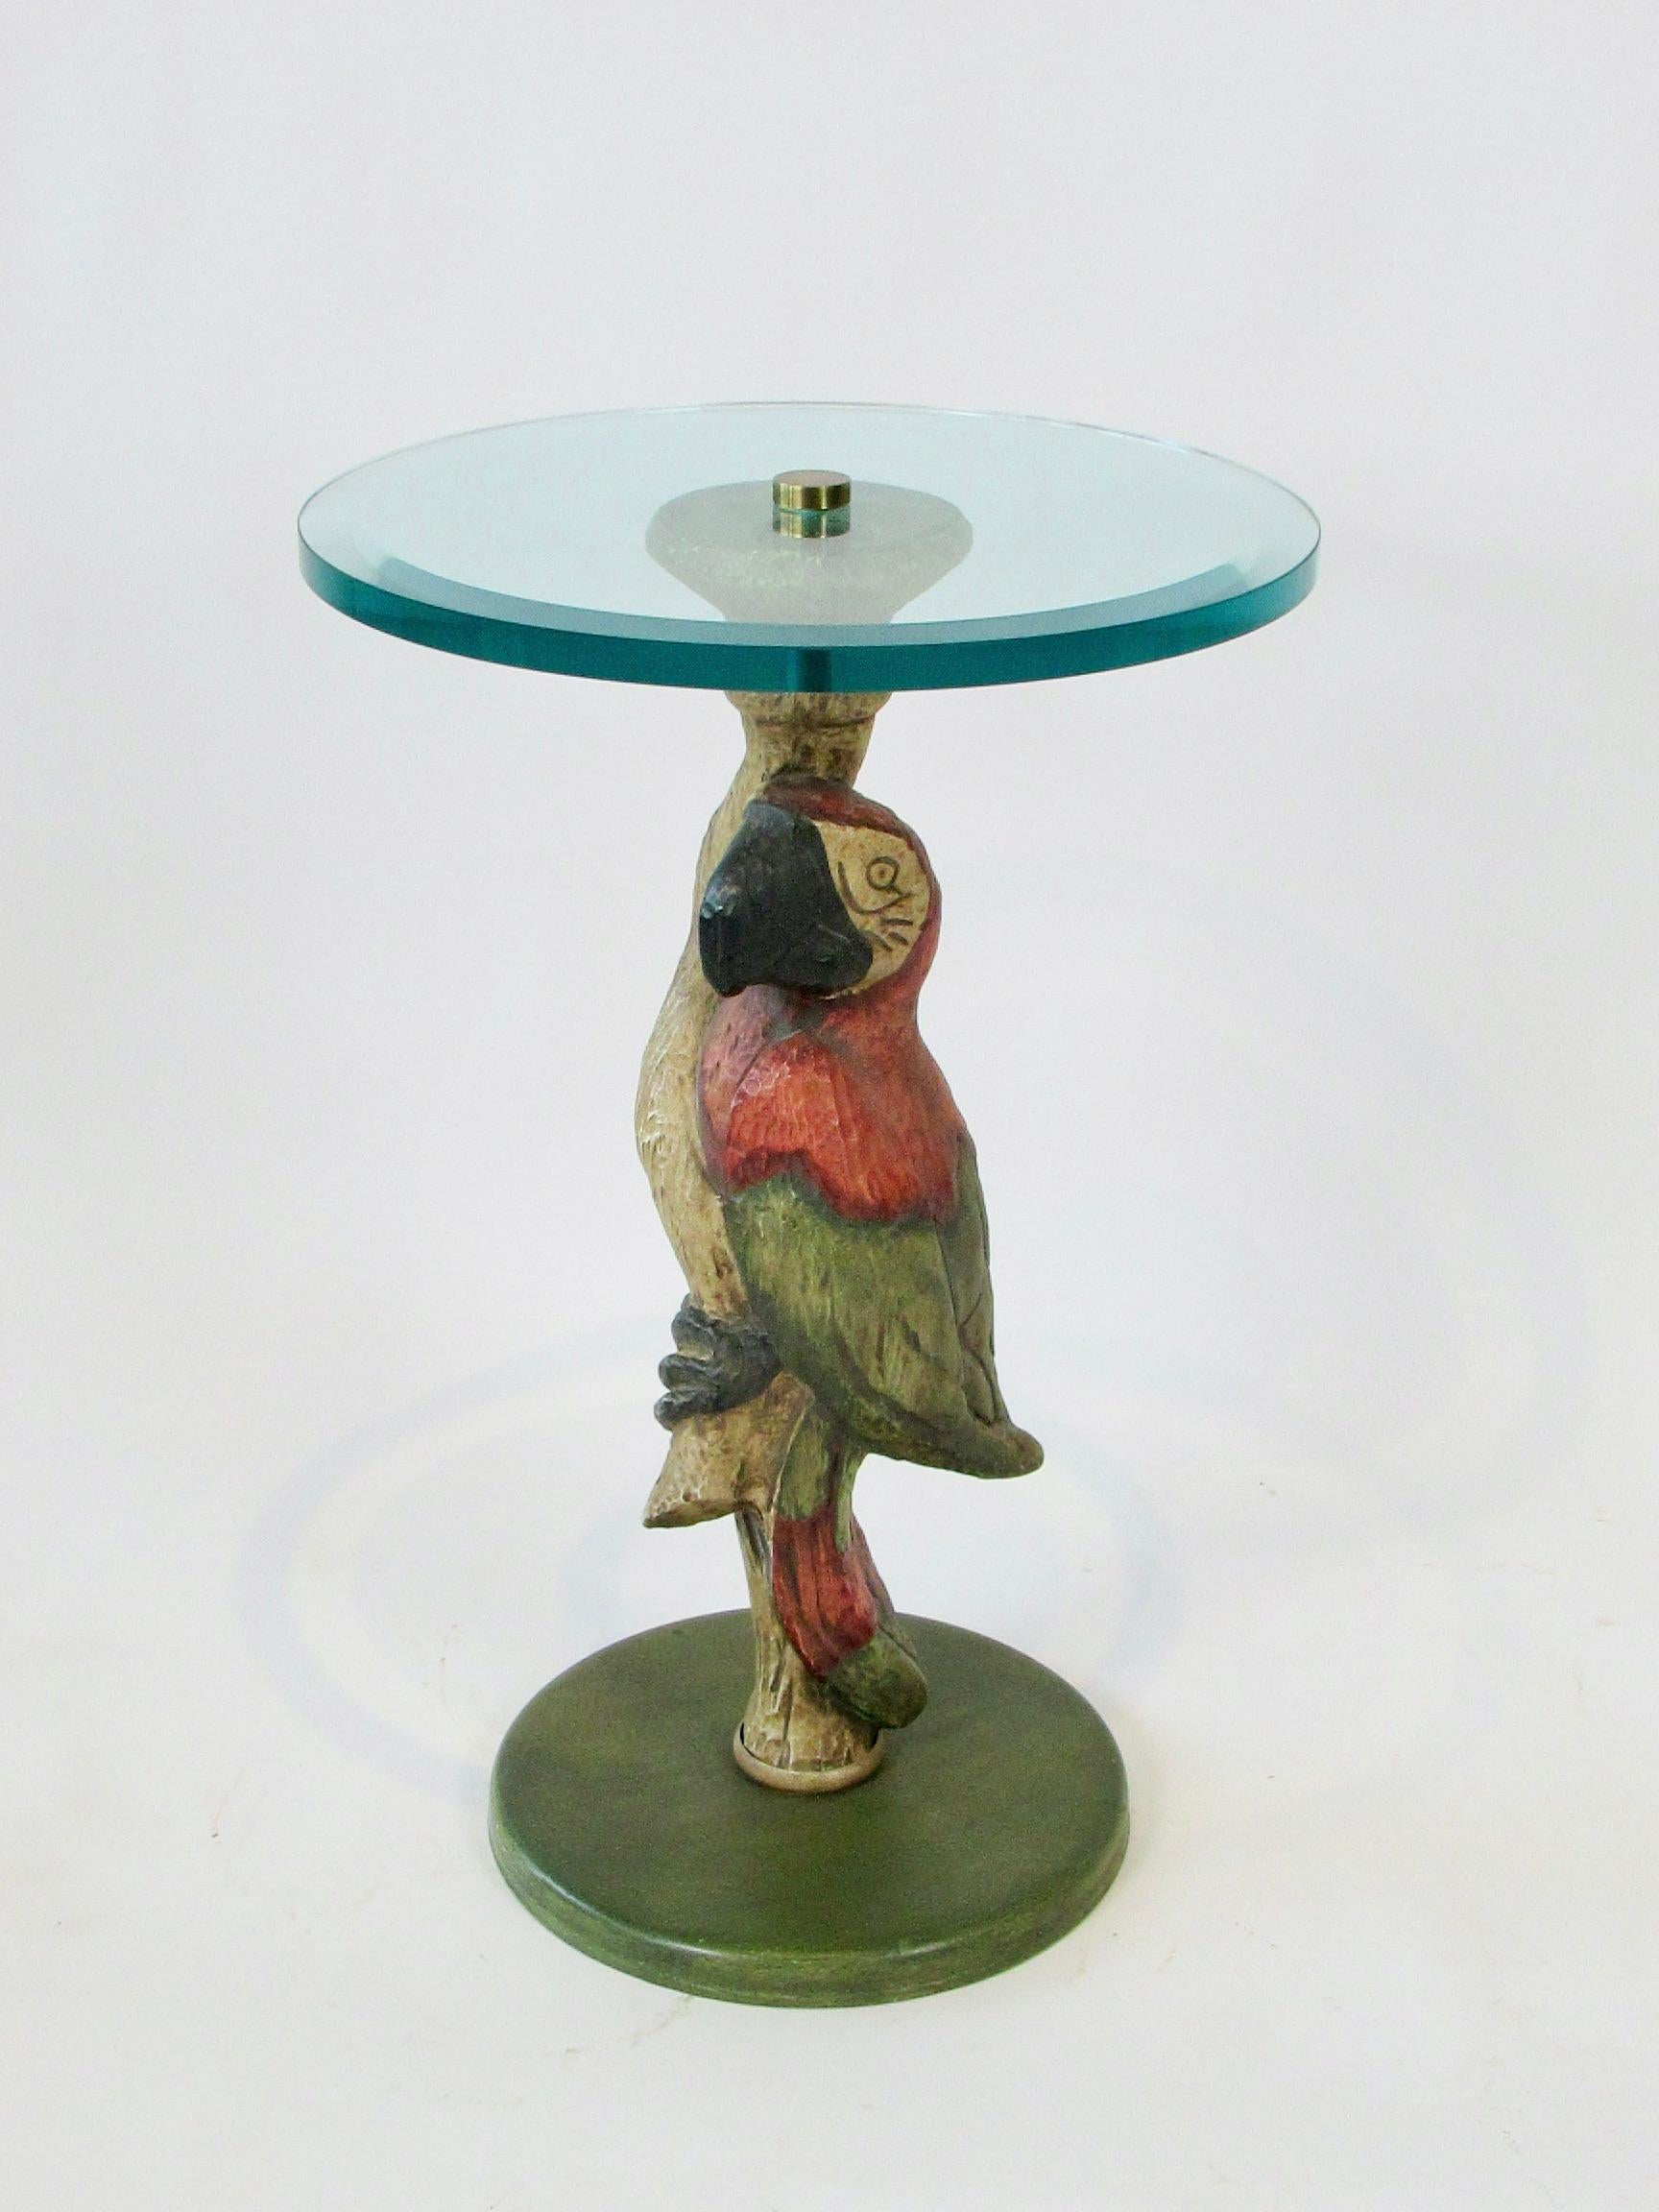 Whimsical Polly Want a Table Bevel Glass on Parrot Base Style of Maitland Smith In Good Condition For Sale In Ferndale, MI